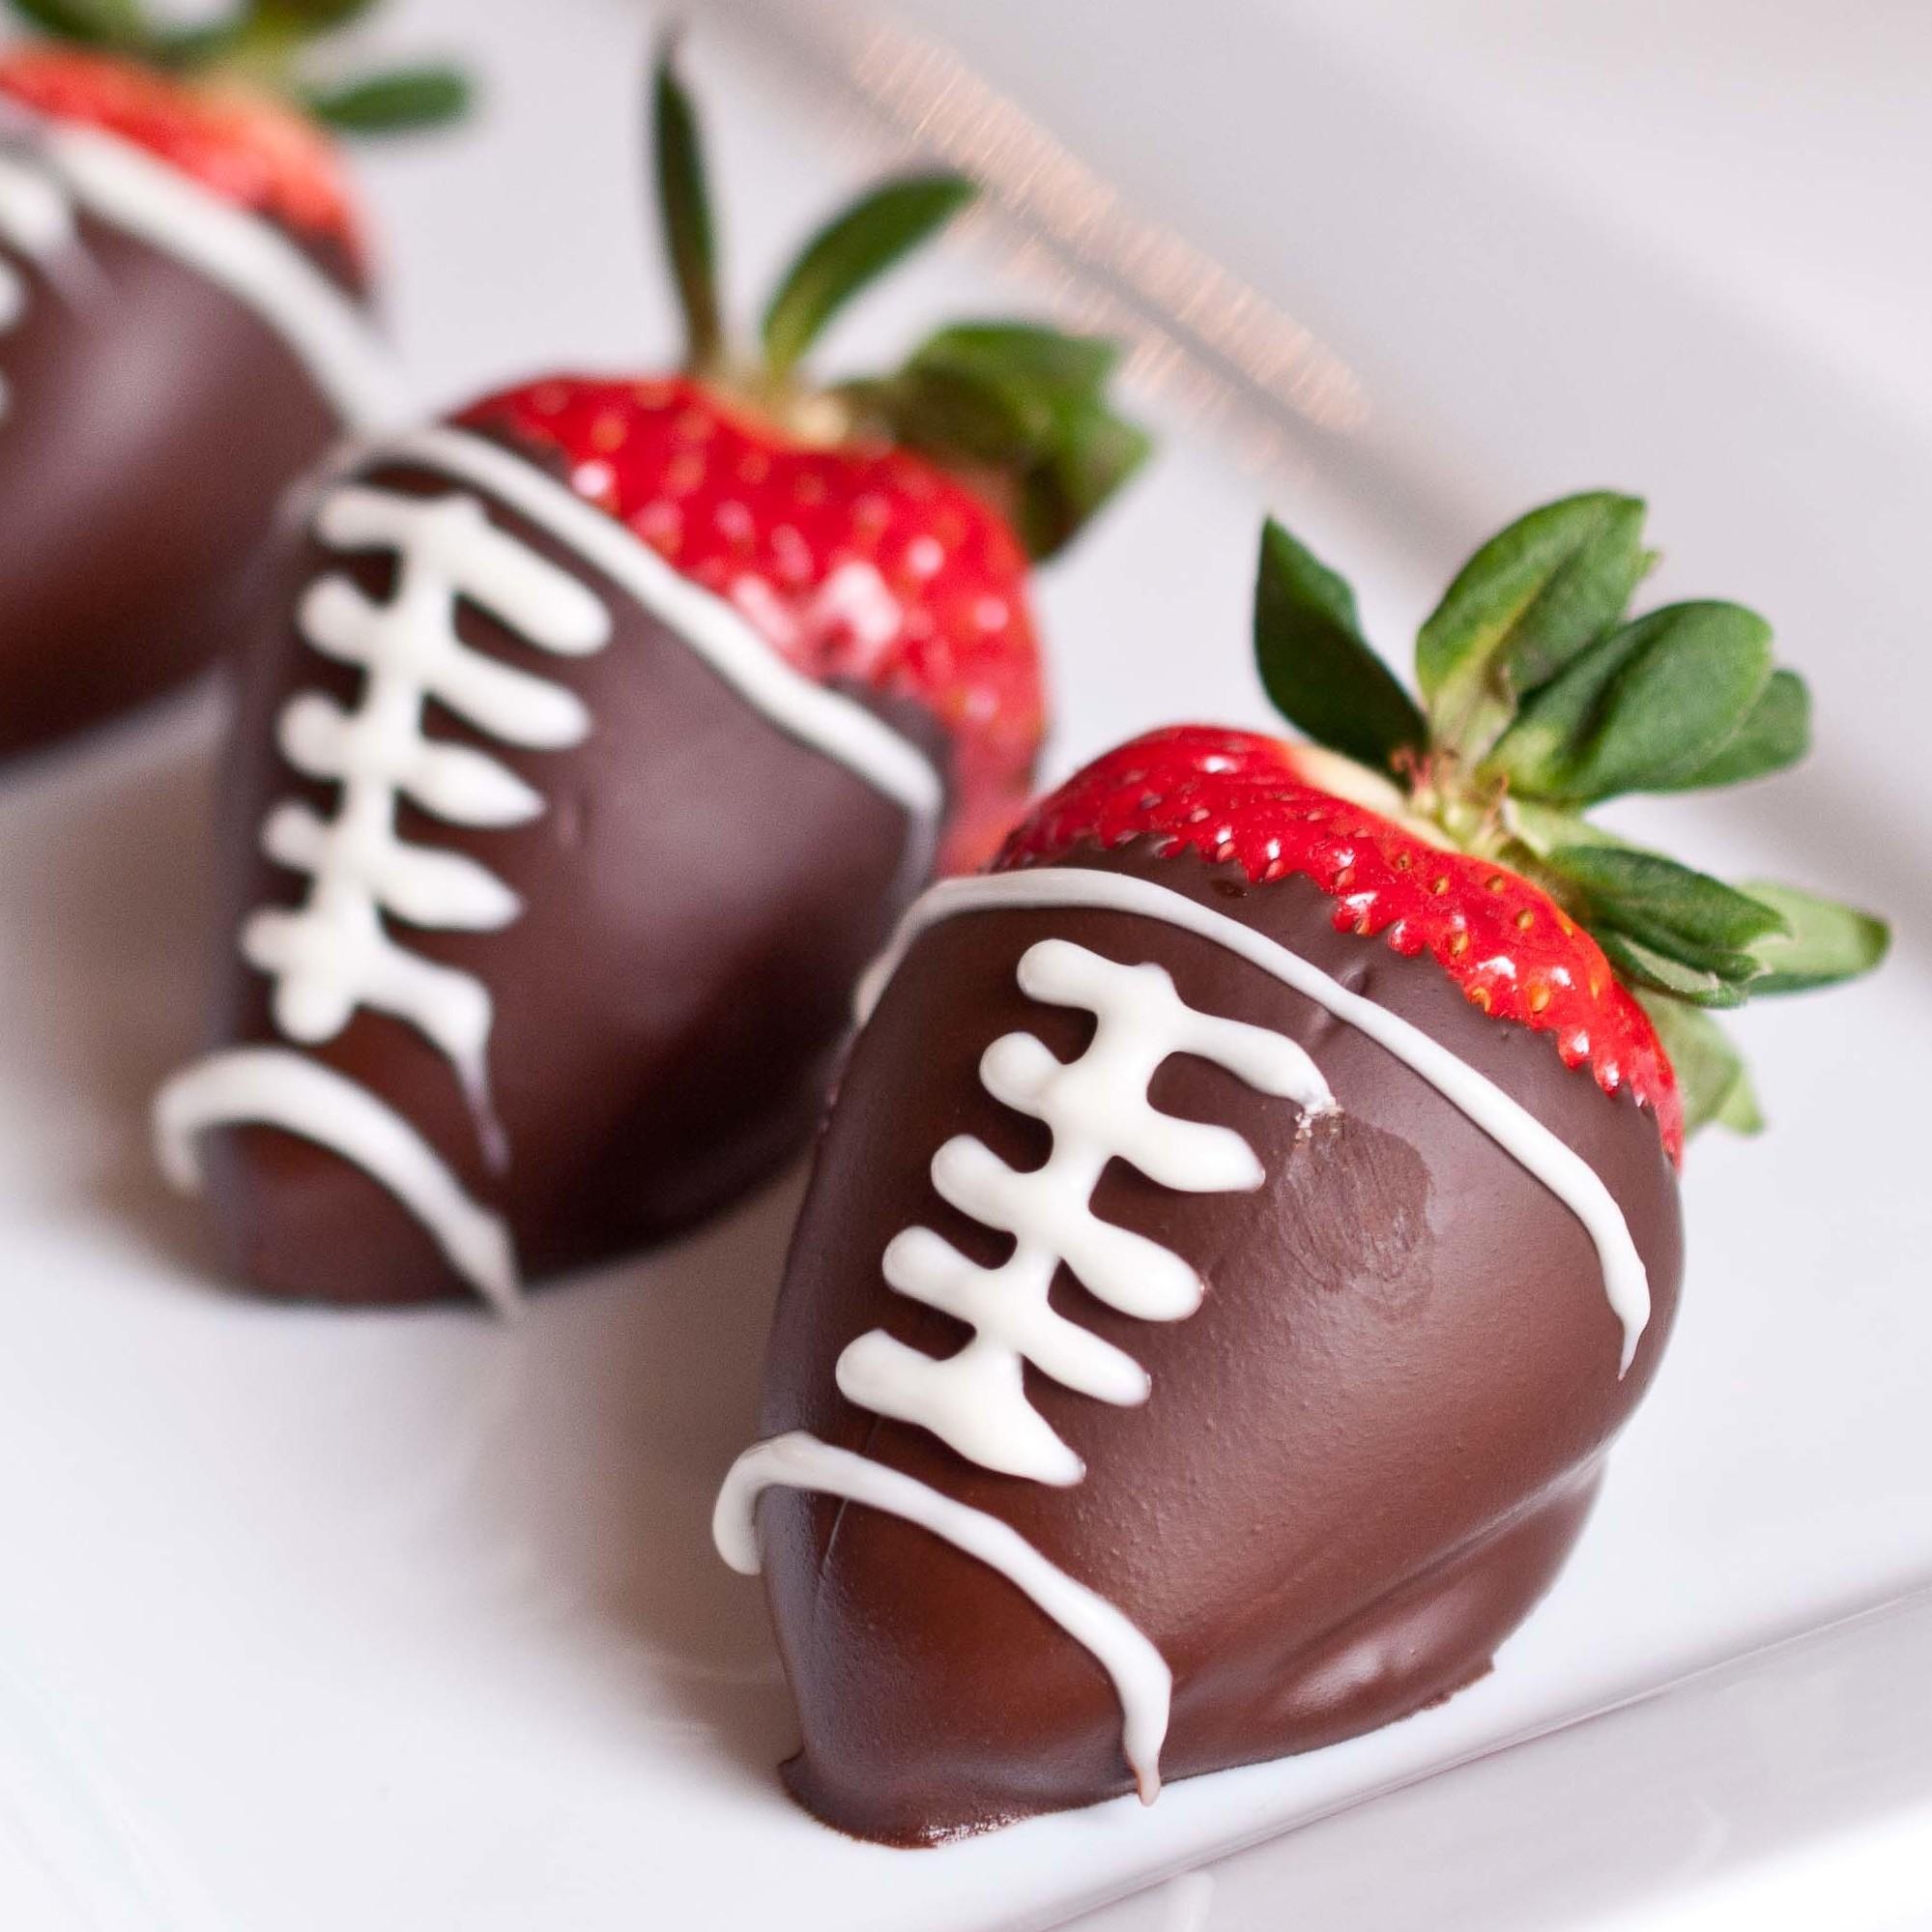 Super Bowl Foods And Snacks